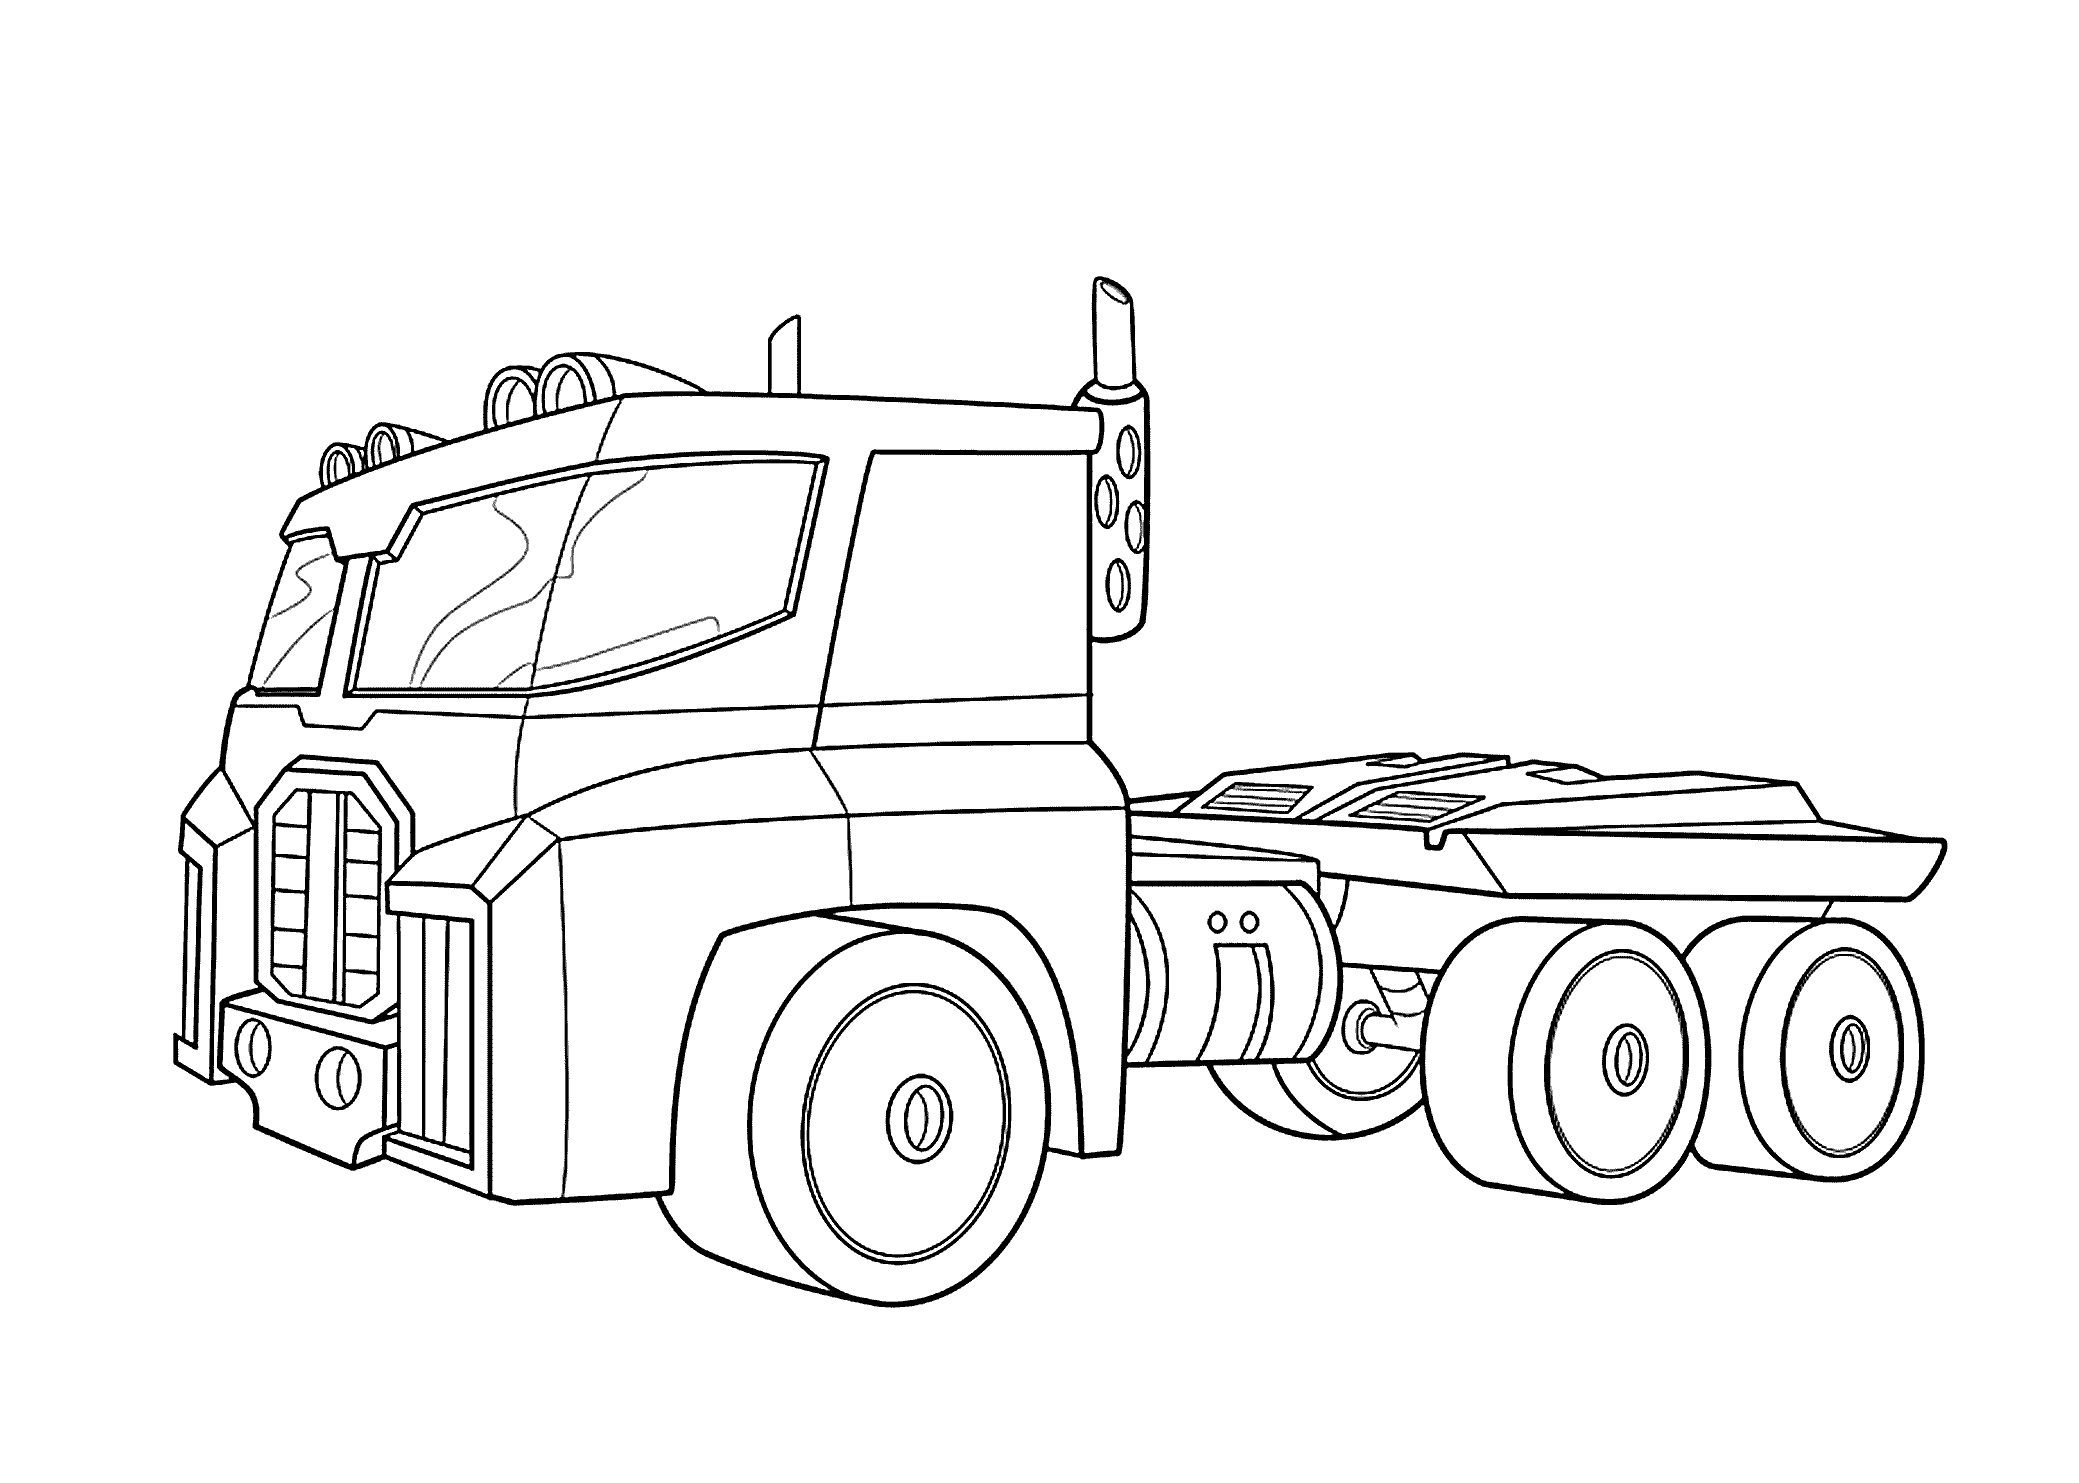 Optimus Prime Coloring Pages TV Film Truck Printable 2020 05790 Coloring4free